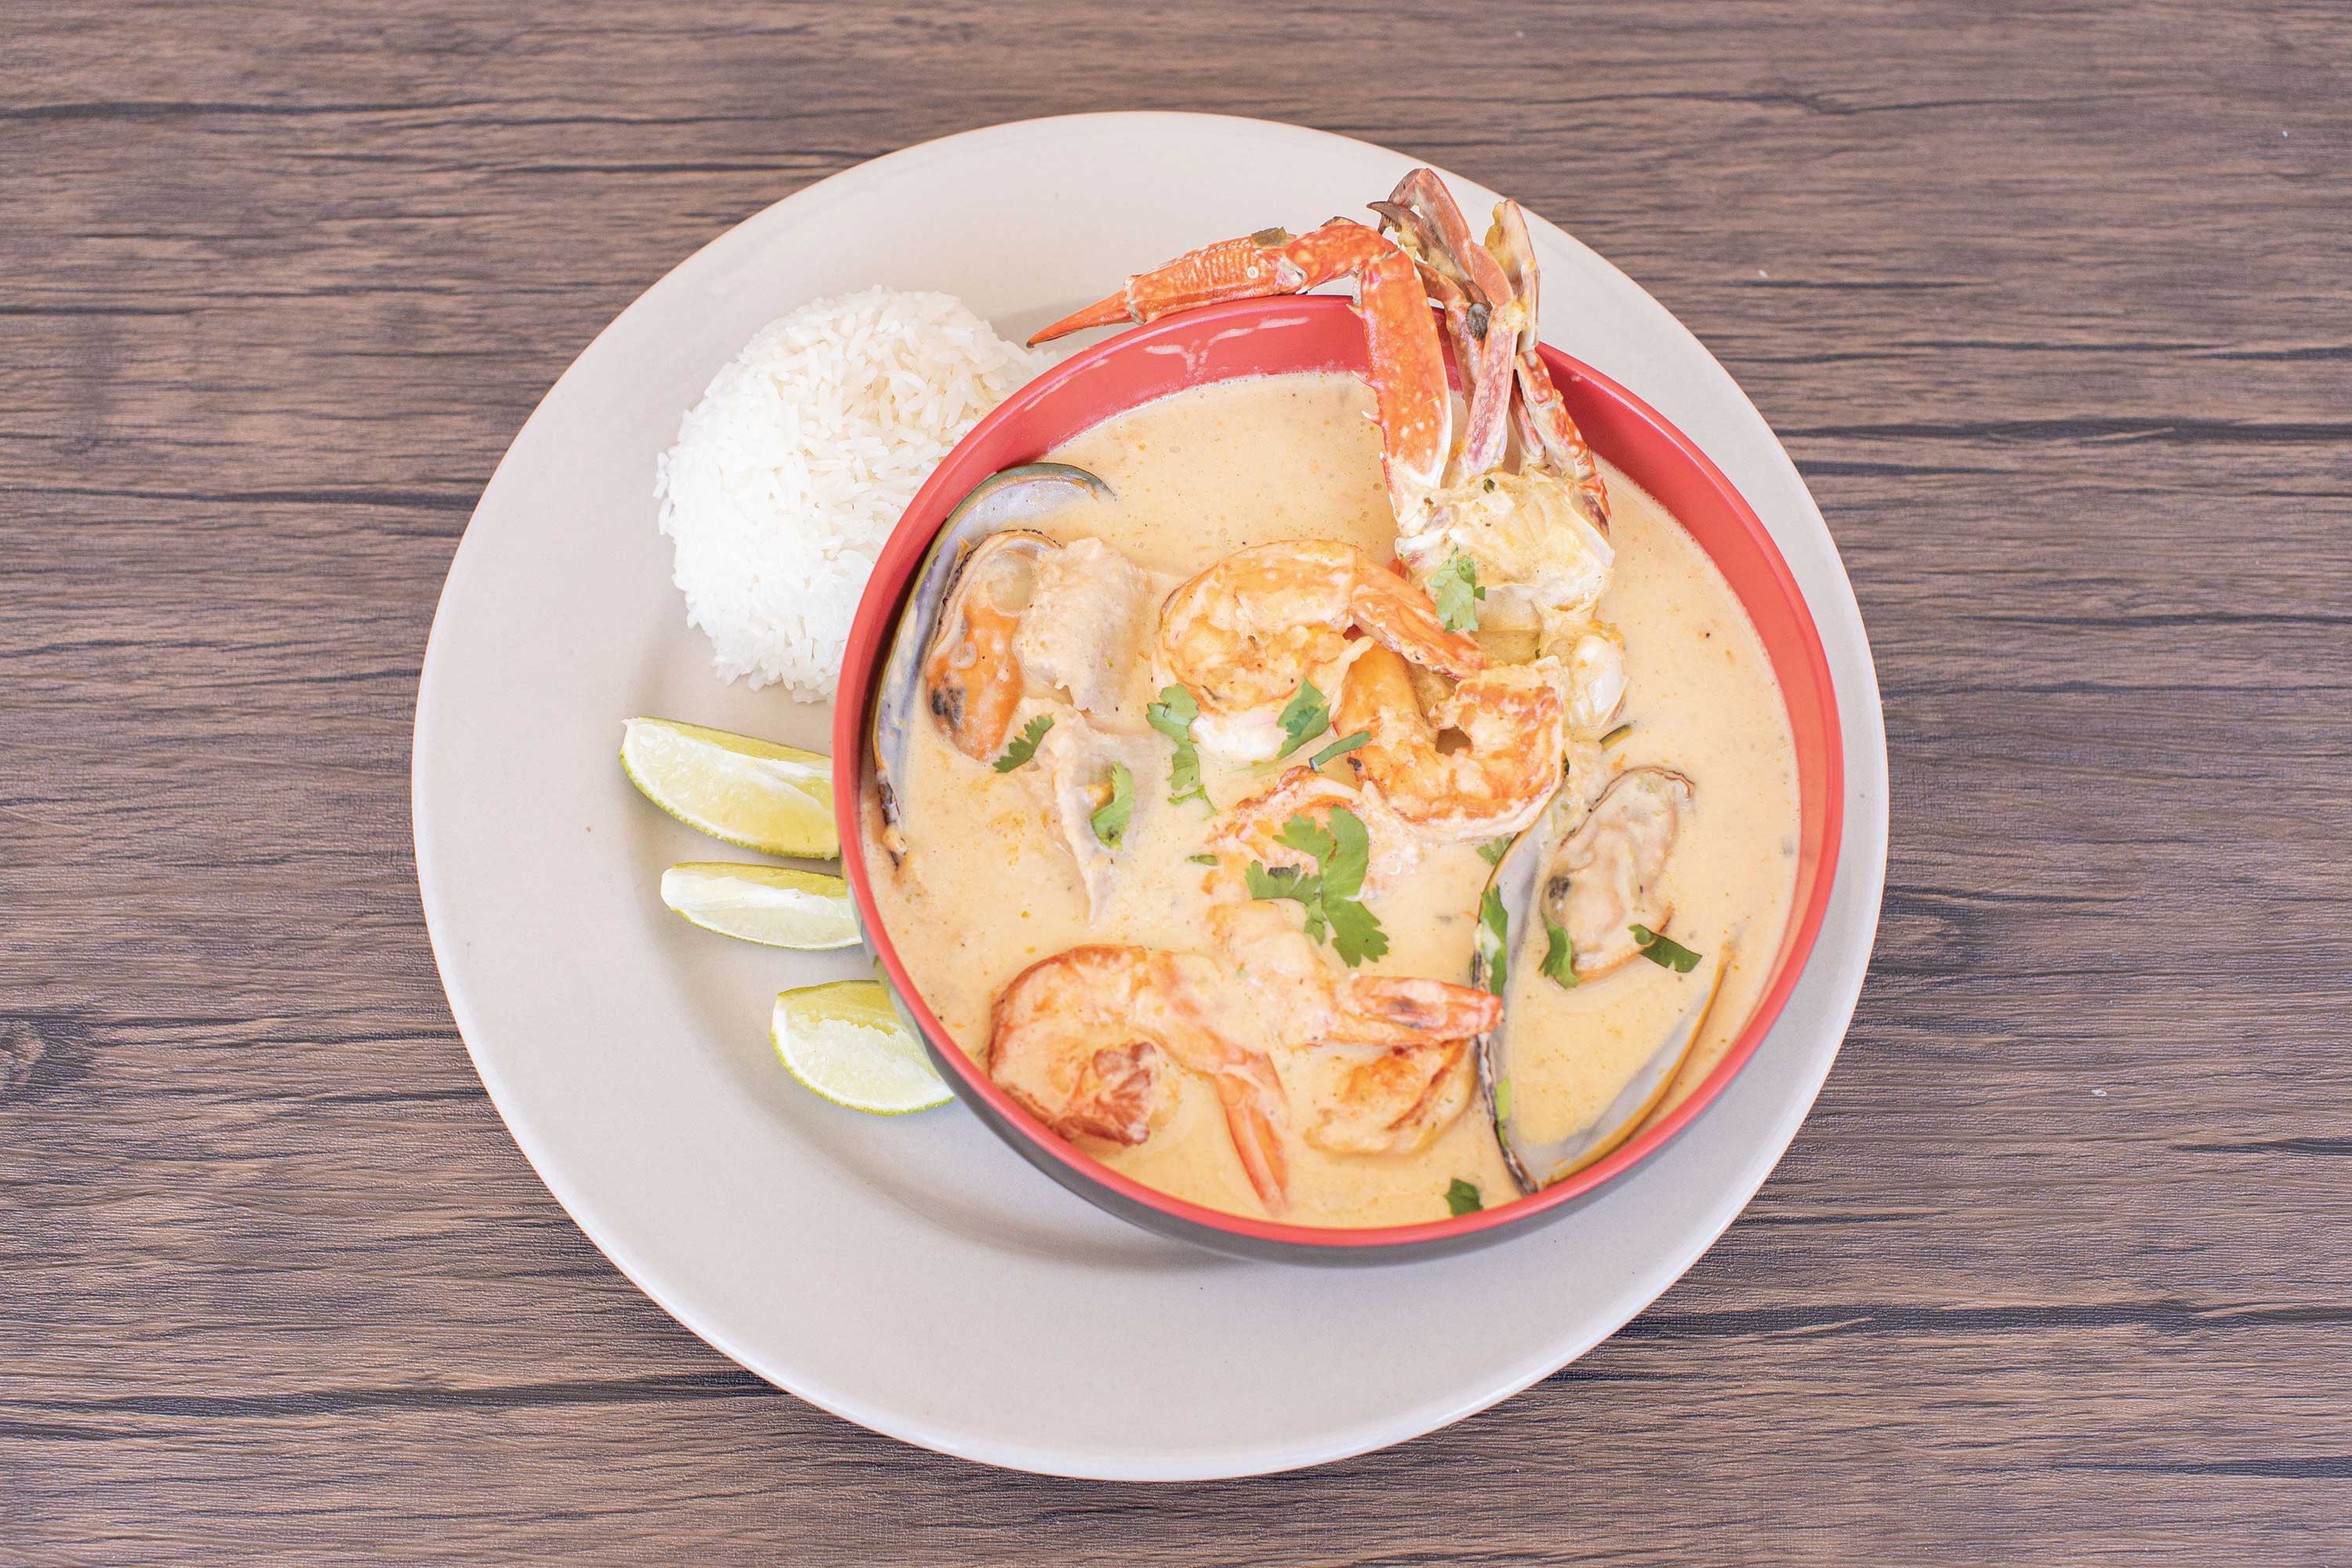 Image: Red bowl filled with a creamy soup. Shrimp, mussels in shell, and crab are arranged on top with a sprinkling of cilantro. Served alongside lime wedges and a mound of white rice.